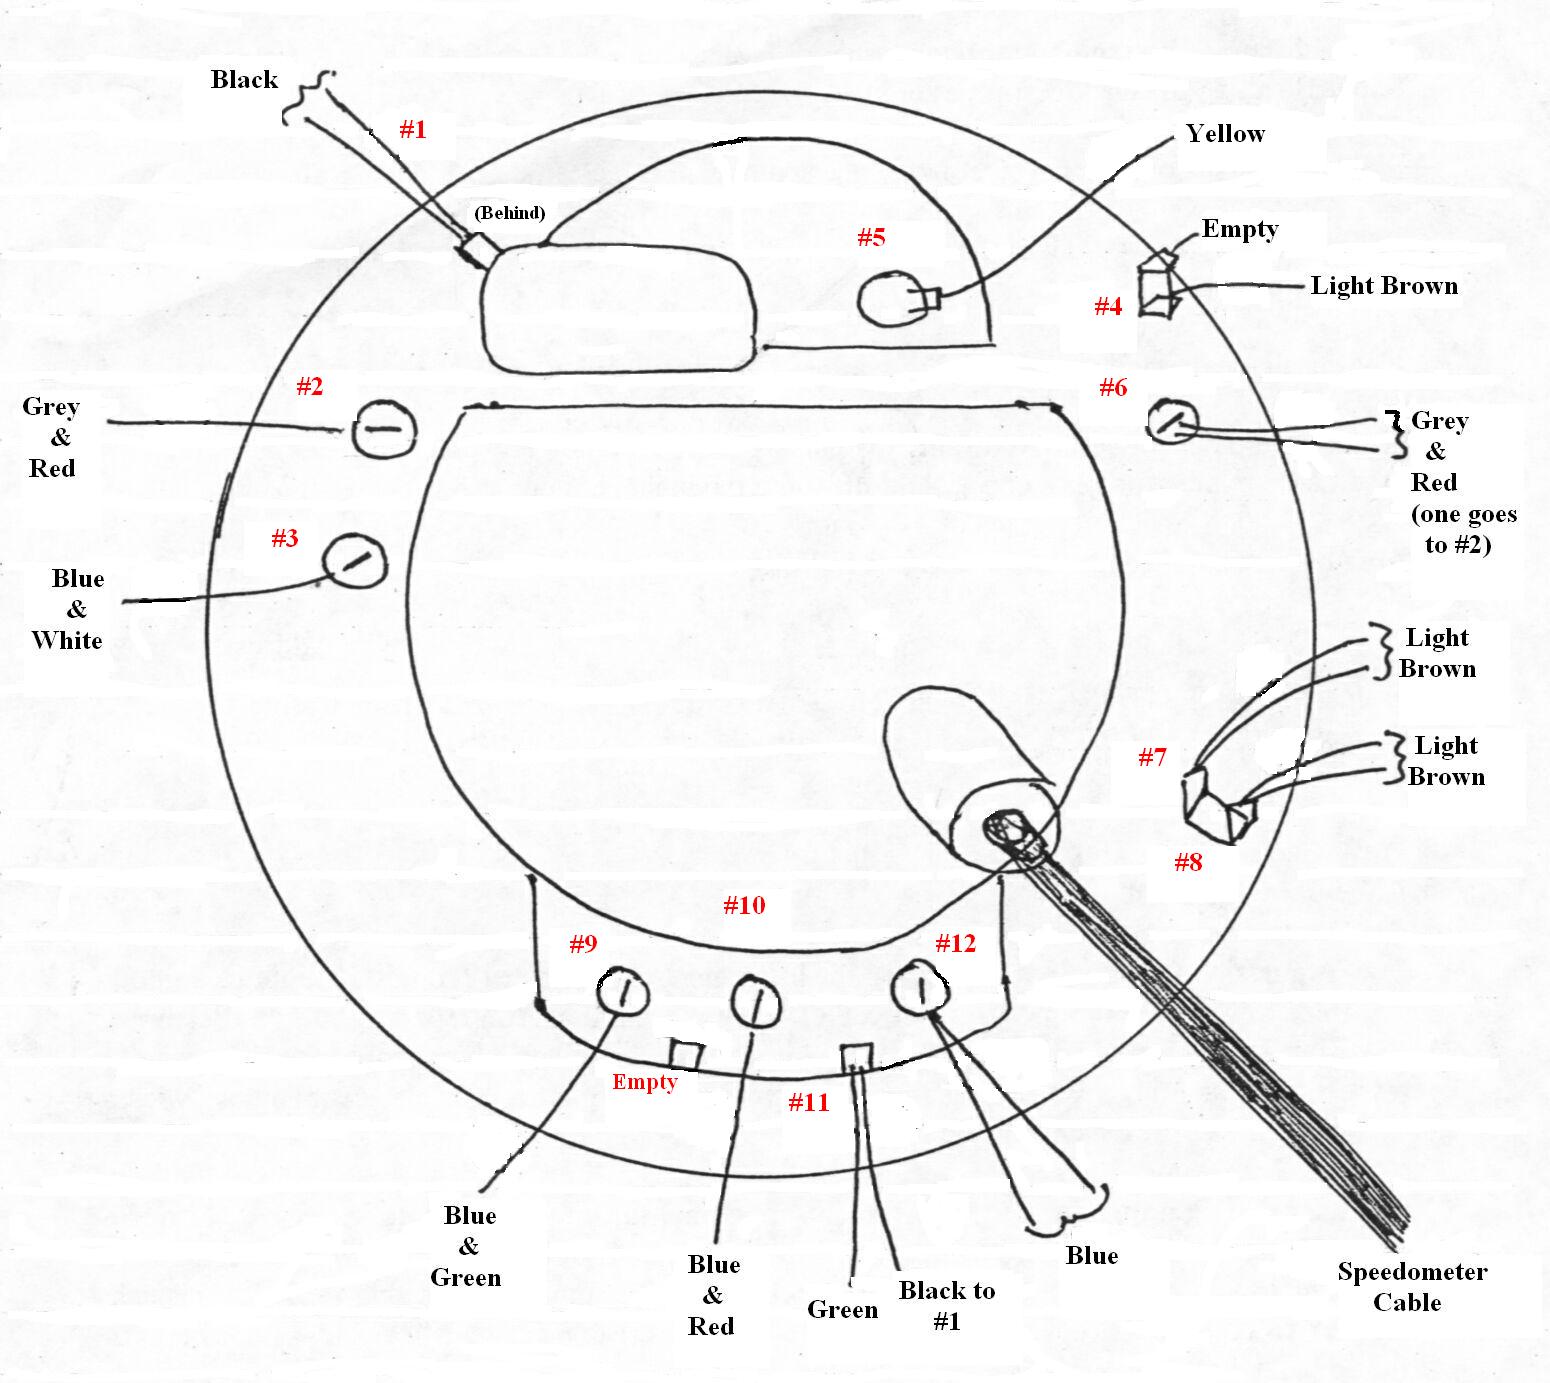 1973 Vw Super Beetle Wiring Diagram from www.vw-resource.com